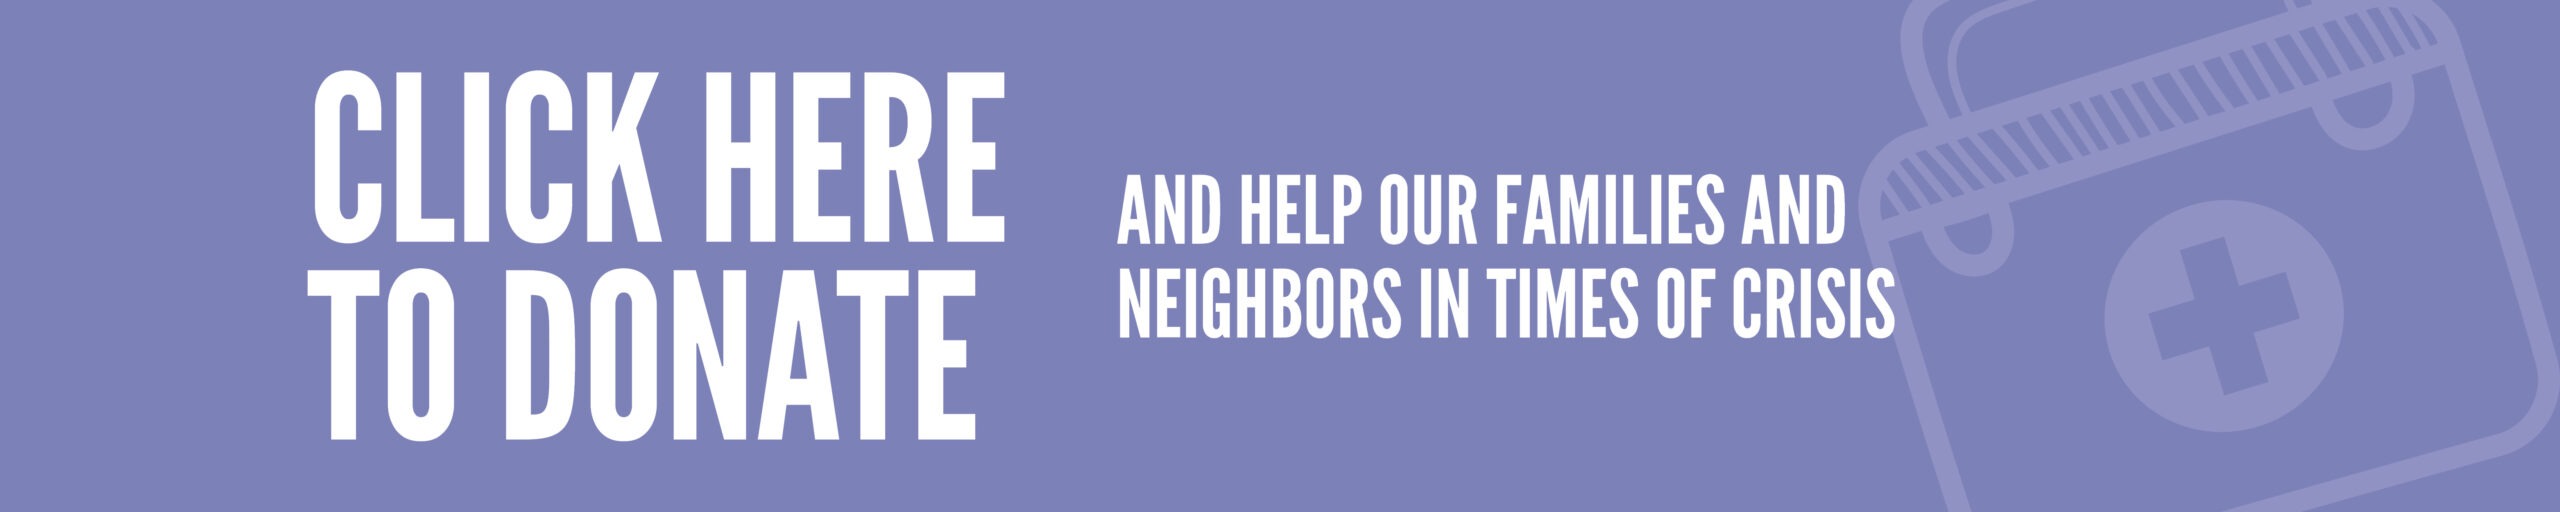 click here to donate and help our families and neighbors in times of crisis